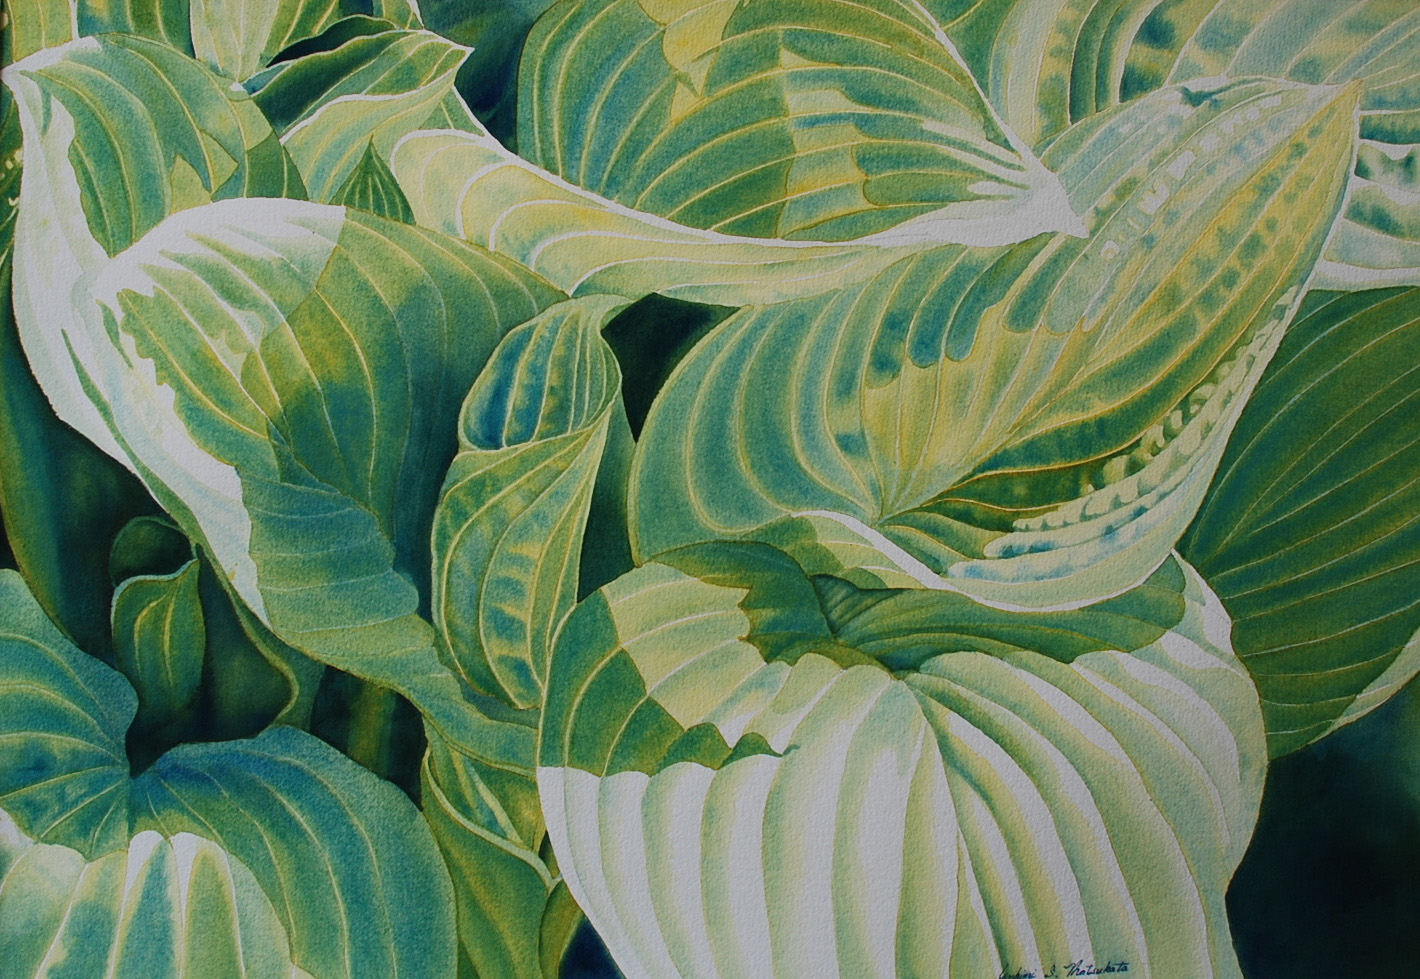 A watercolor titled "Hidden Treasures" by Yoshini S Matsukata that shows variegated hosta leaves in shades of cream, green and blue-green